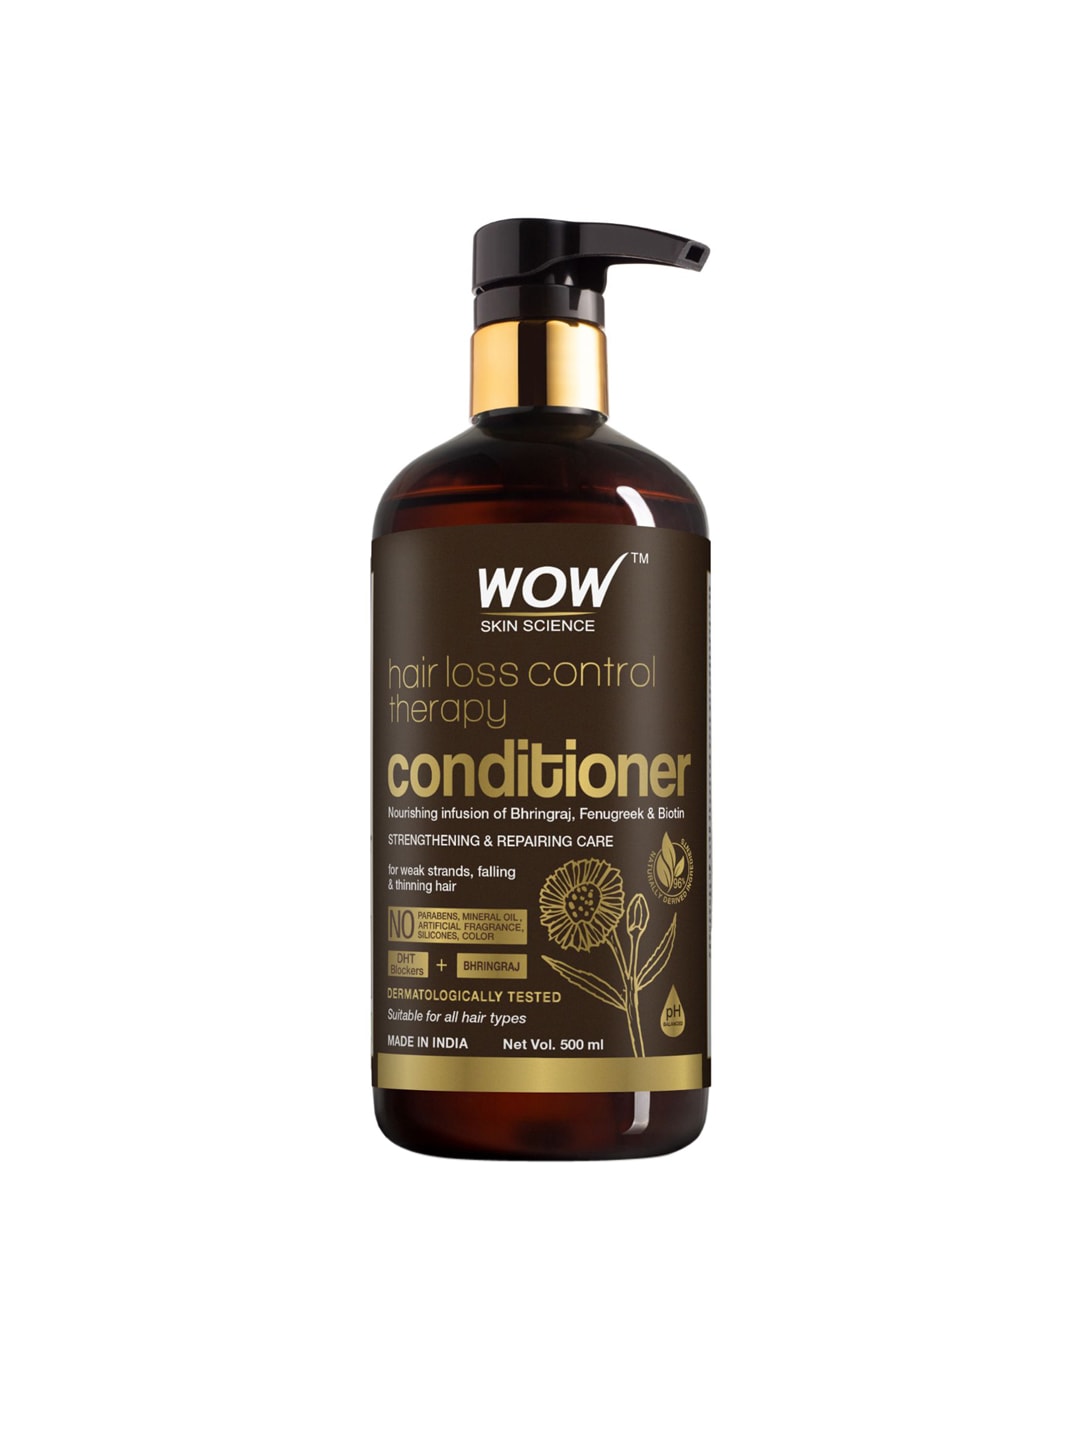 WOW SKIN SCIENCE Hair Loss Control Therapy Conditioner - 500 ml Price in India